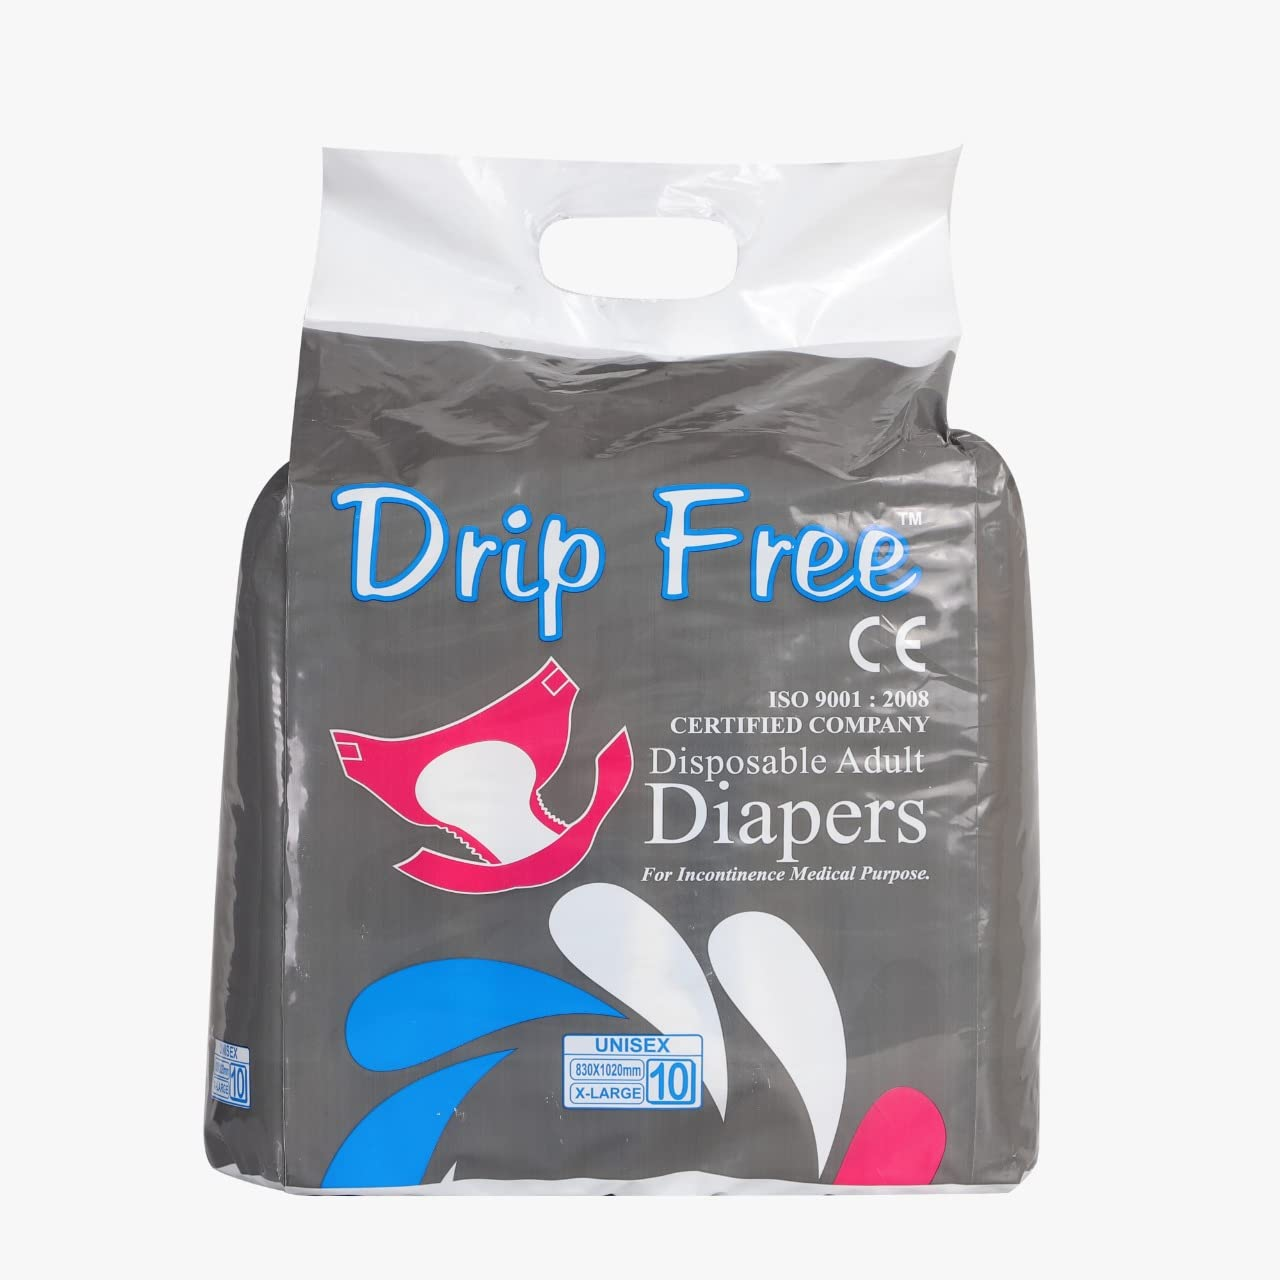 Drip Free Paramount Adult Diaper XL Size Pack of 10 Pcs, Waist Size 50-67 Inch